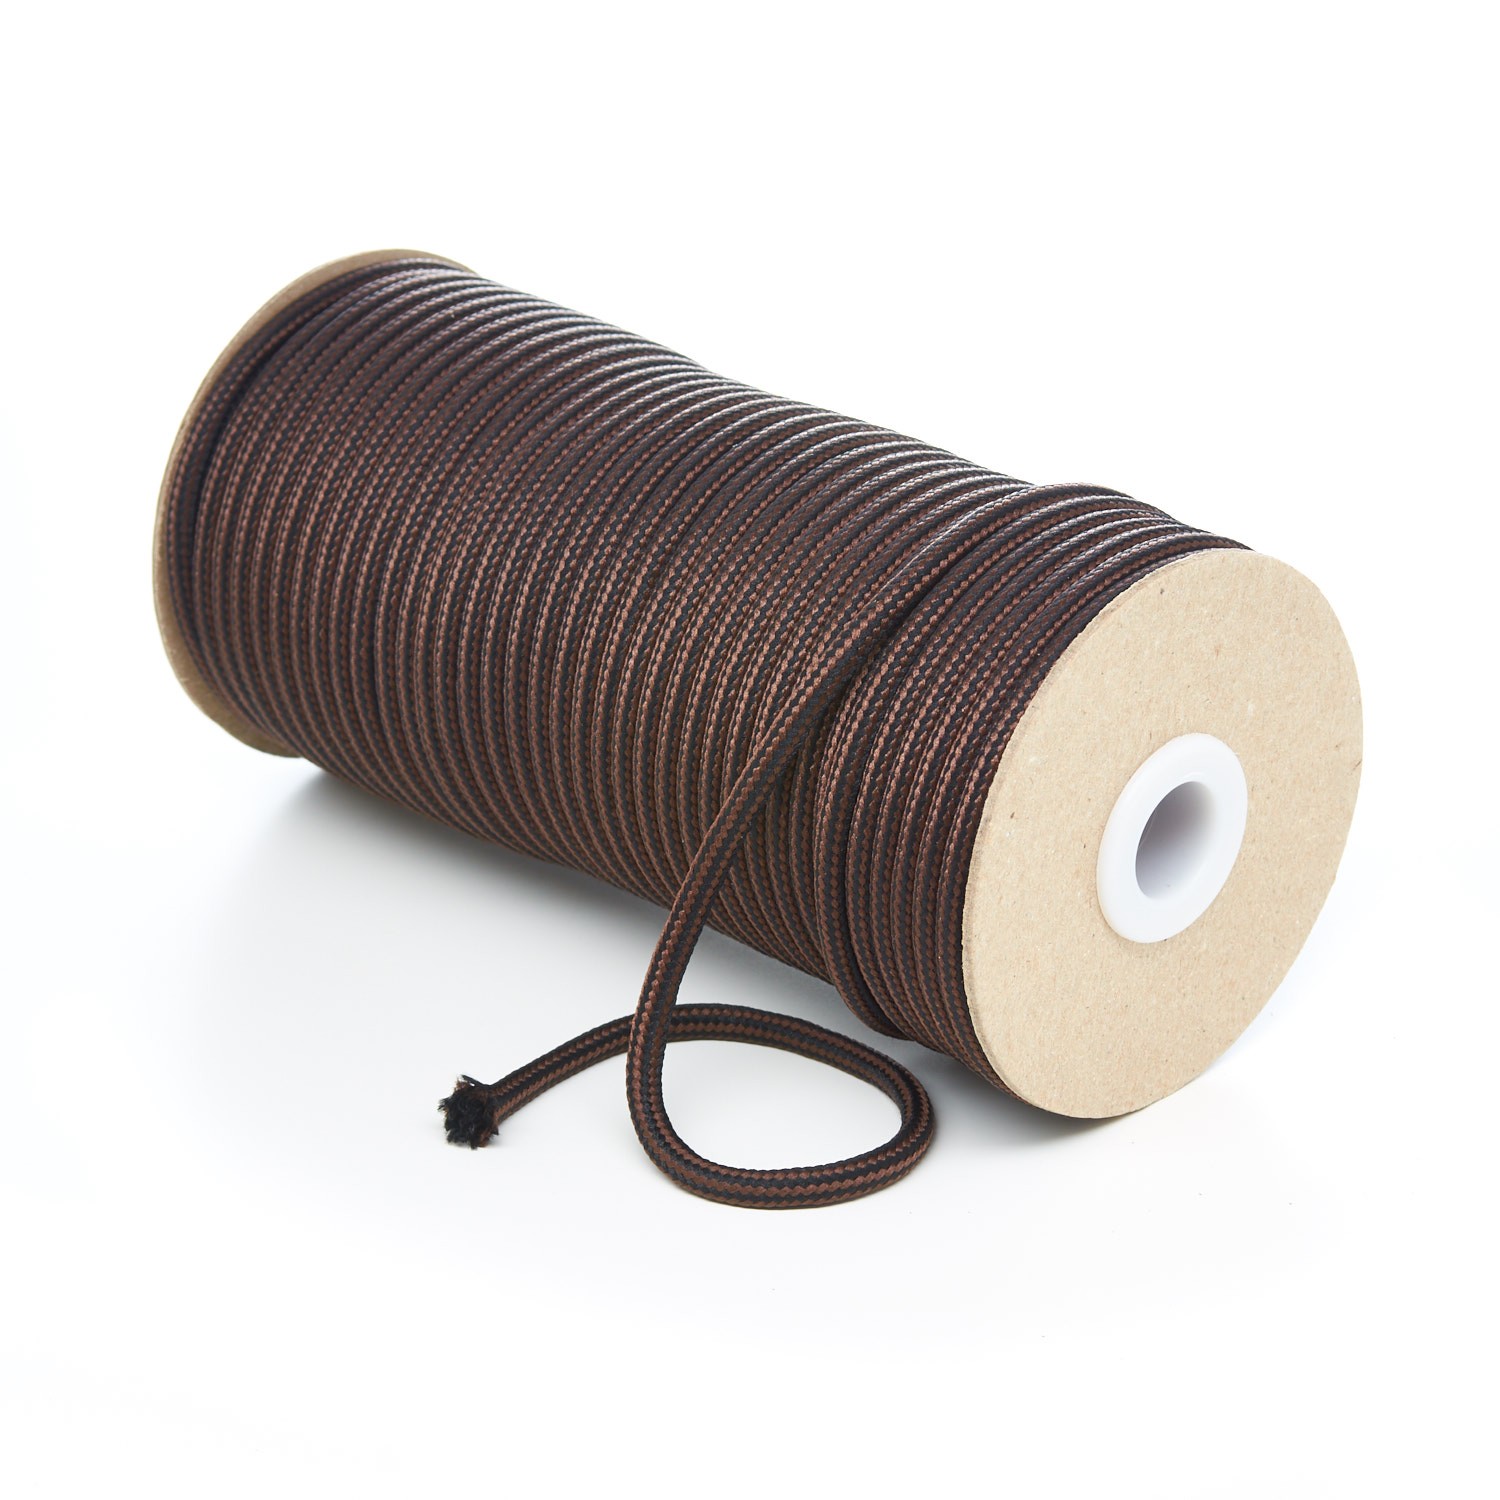 T621 Round Cord Stripes Brown and Black Kalsi Cords